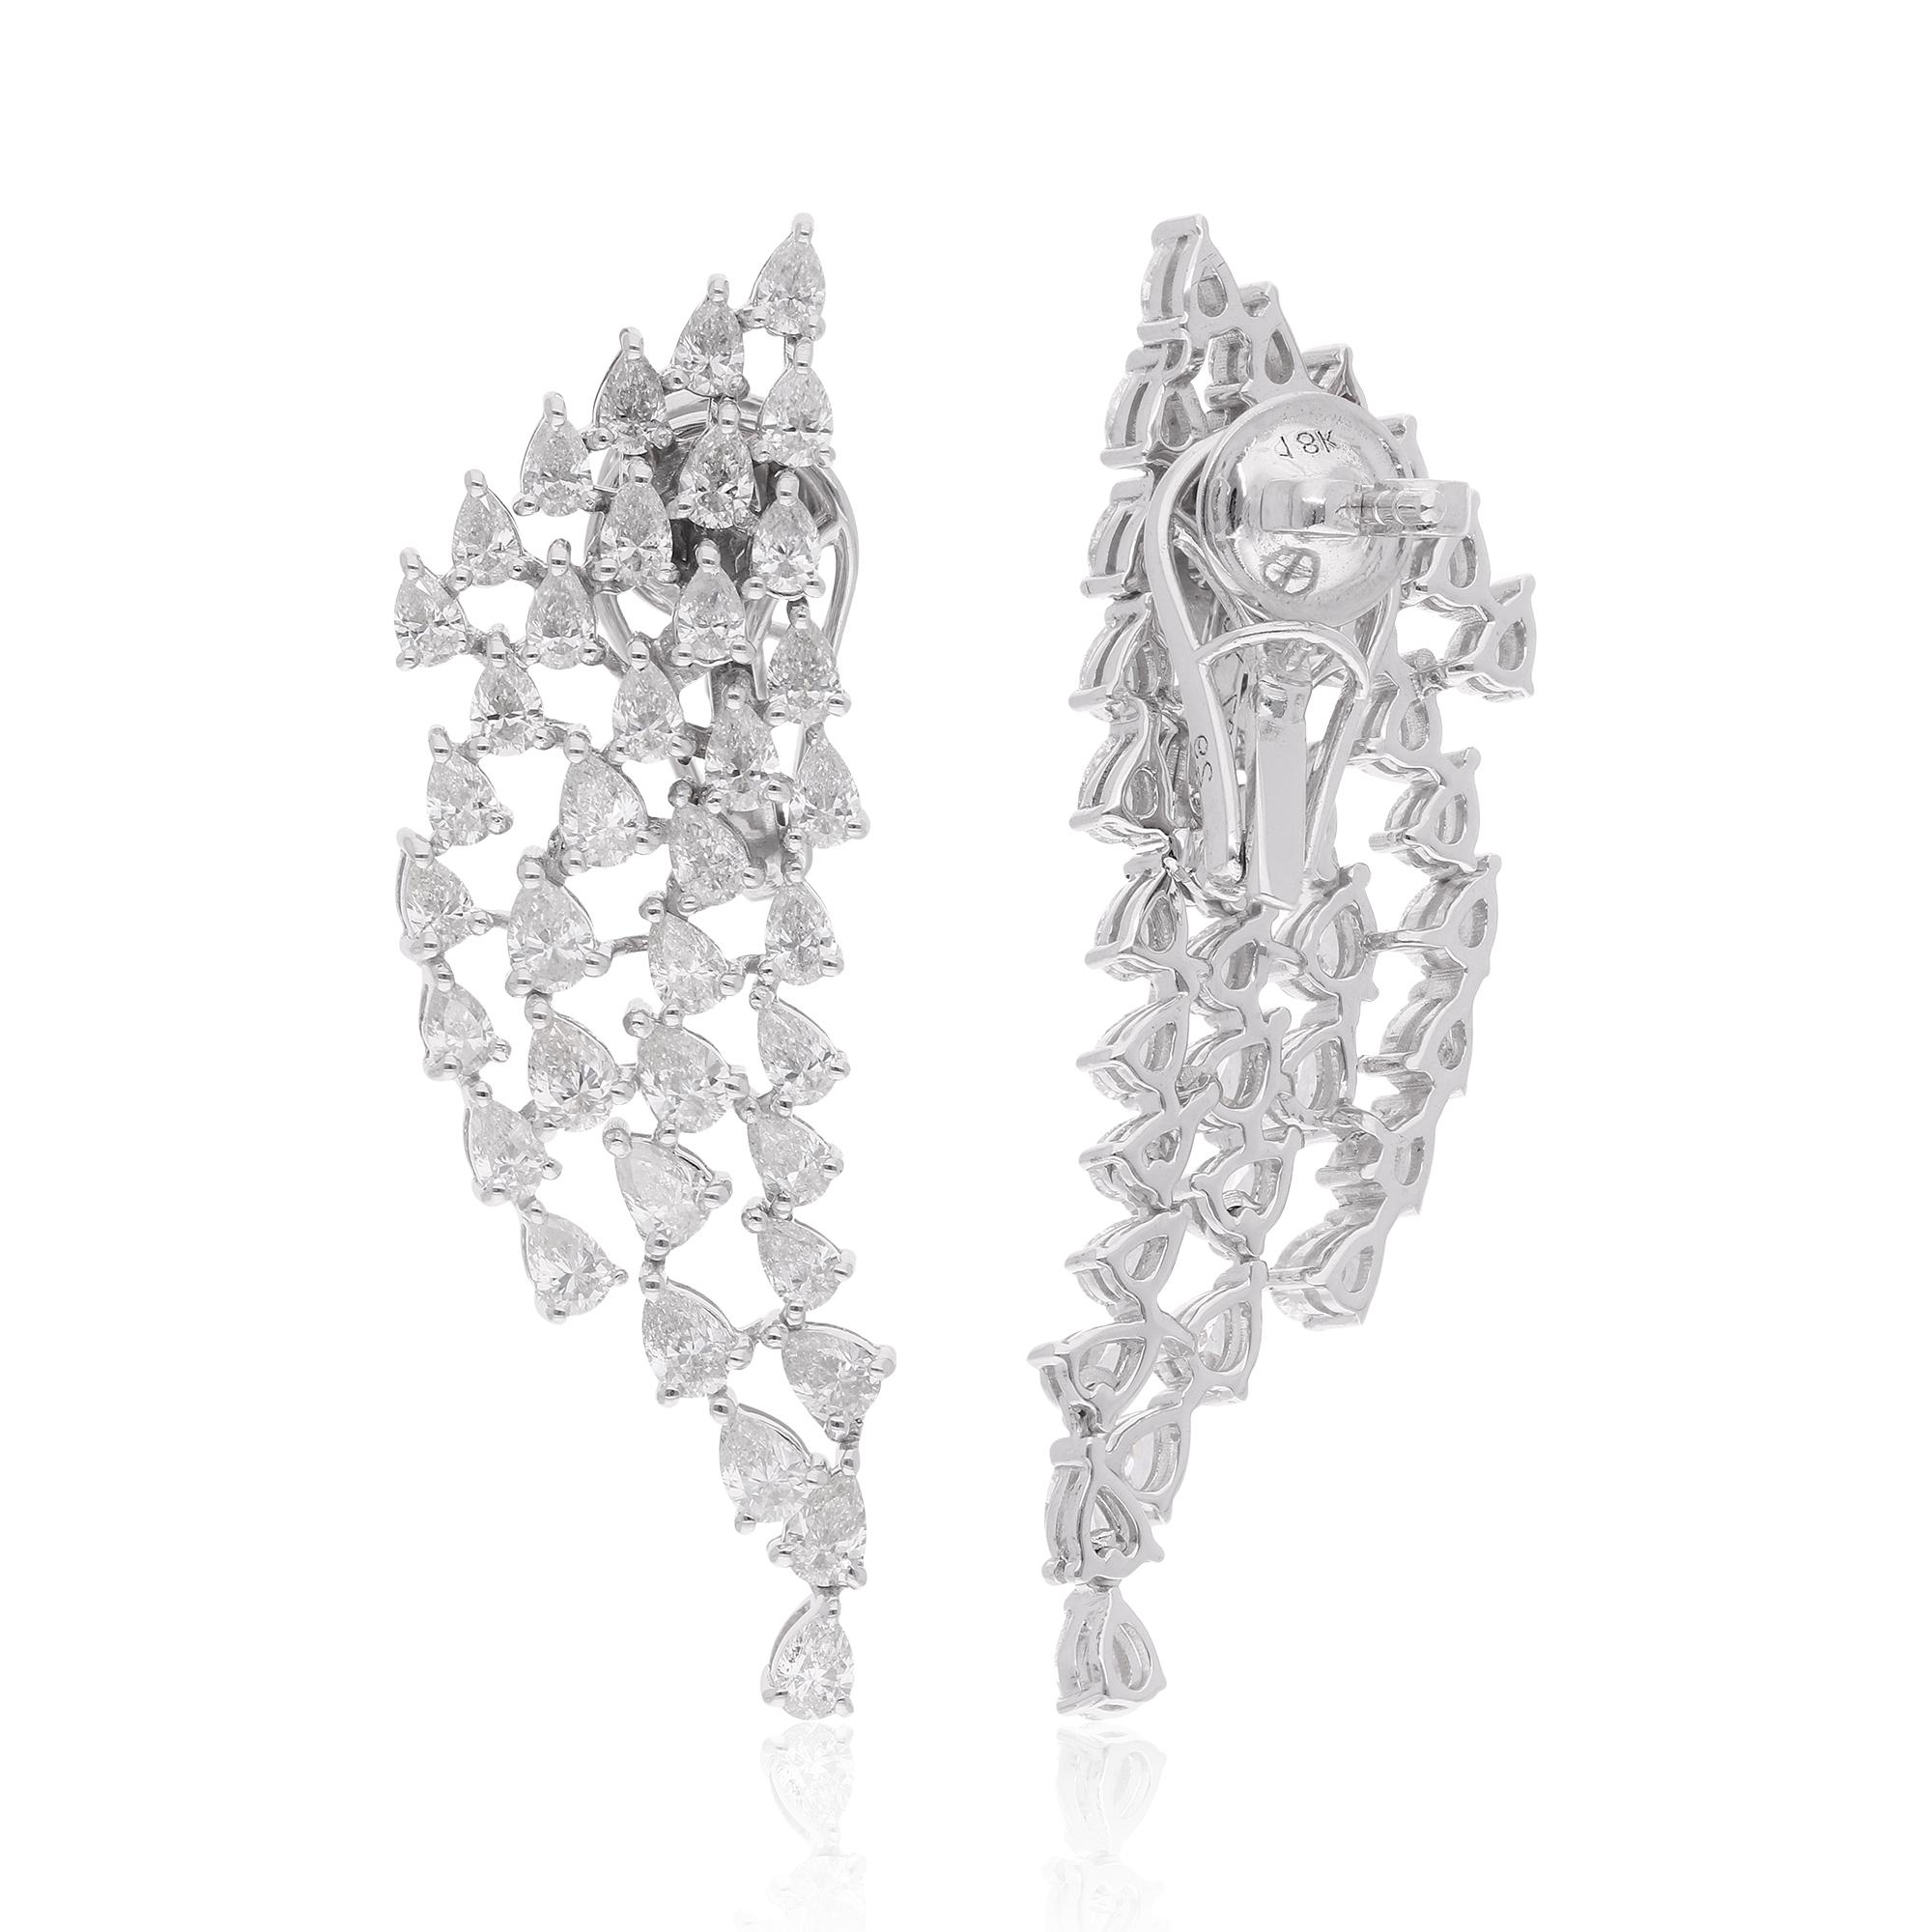 Dive into the magical temptation of this stunning Earrings in attractive shape and design made of White Gold studded with Diamond. An essential ornament to add in your jewellery collection!

✧✧Welcome To Our Shop Spectrum Jewels